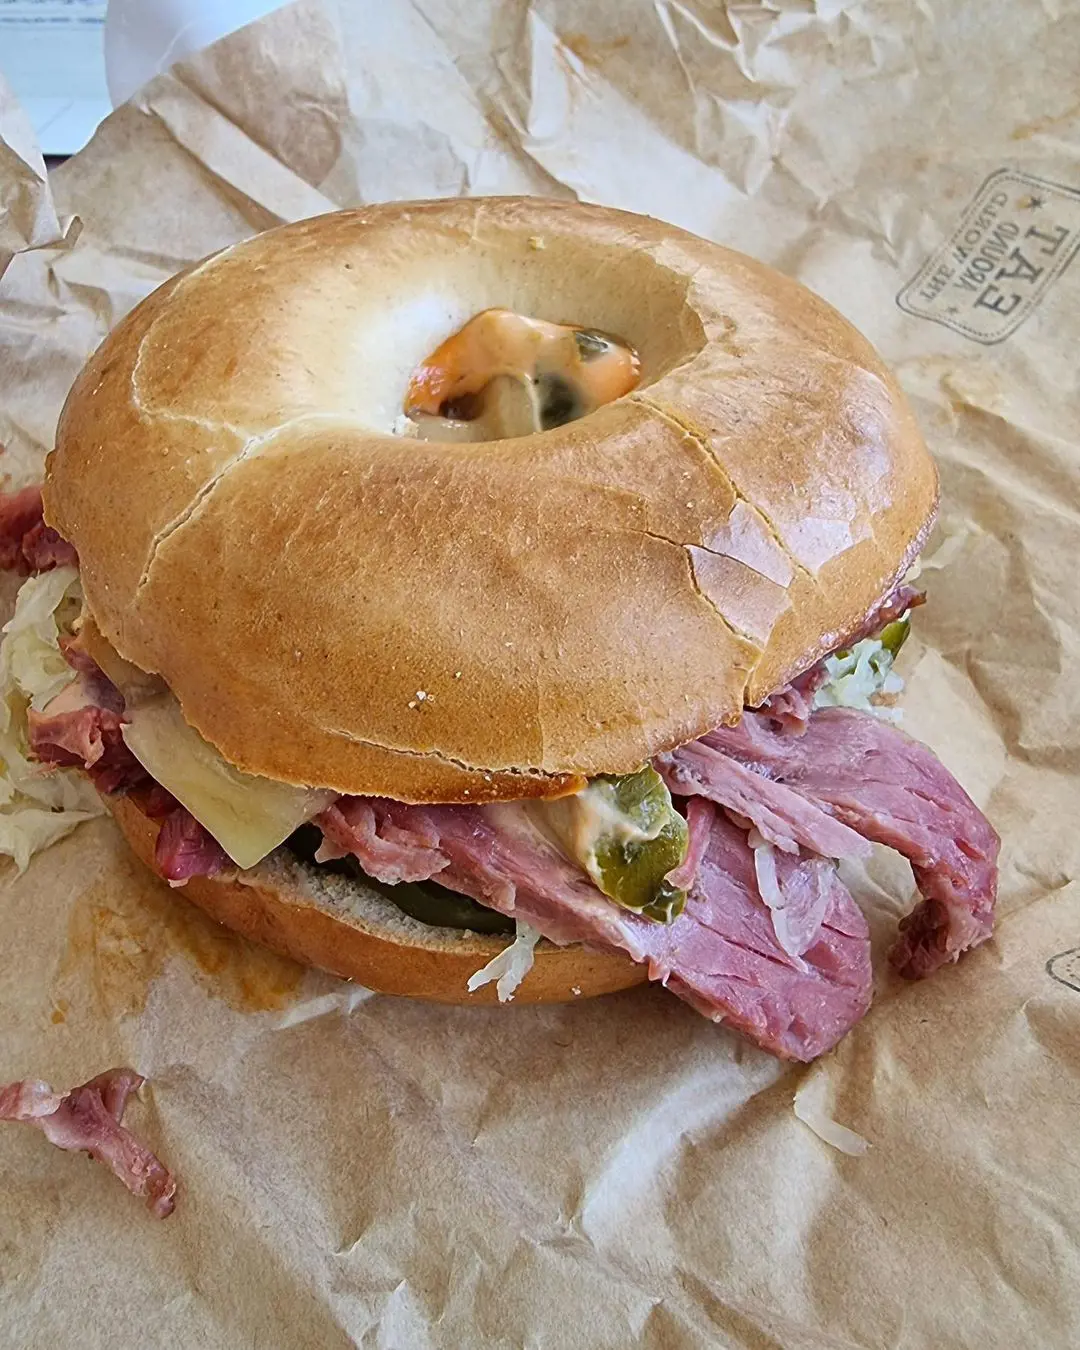 The coveted hot salt beef bagel